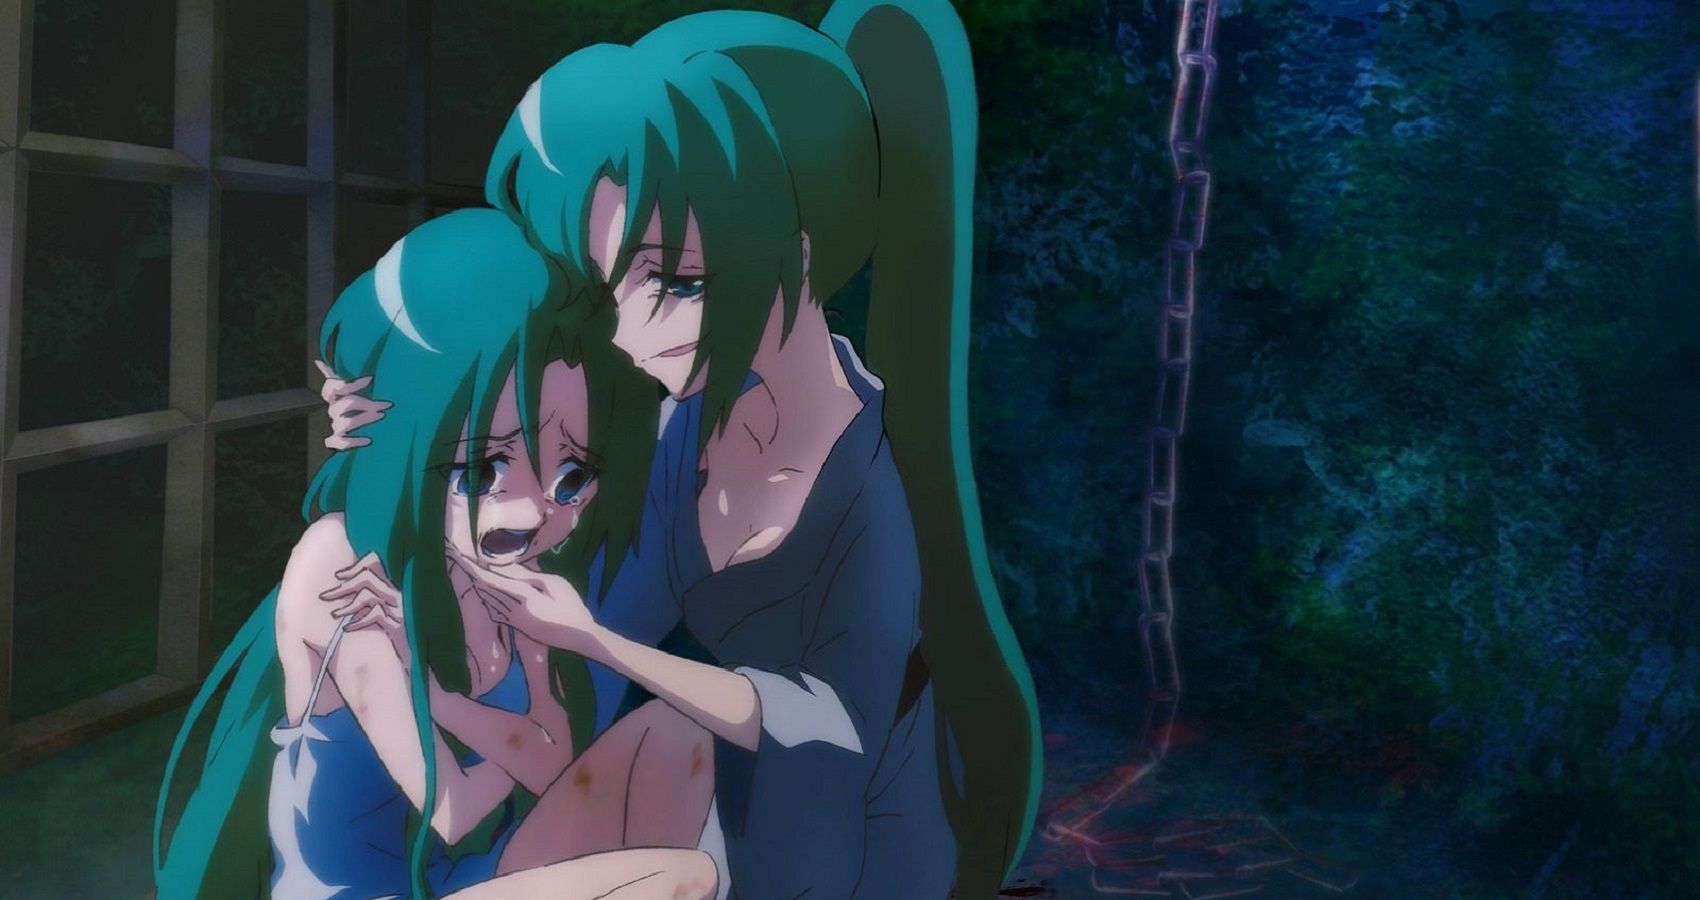 When They Cry The 10 Scariest Scenes From The Anime Ranked